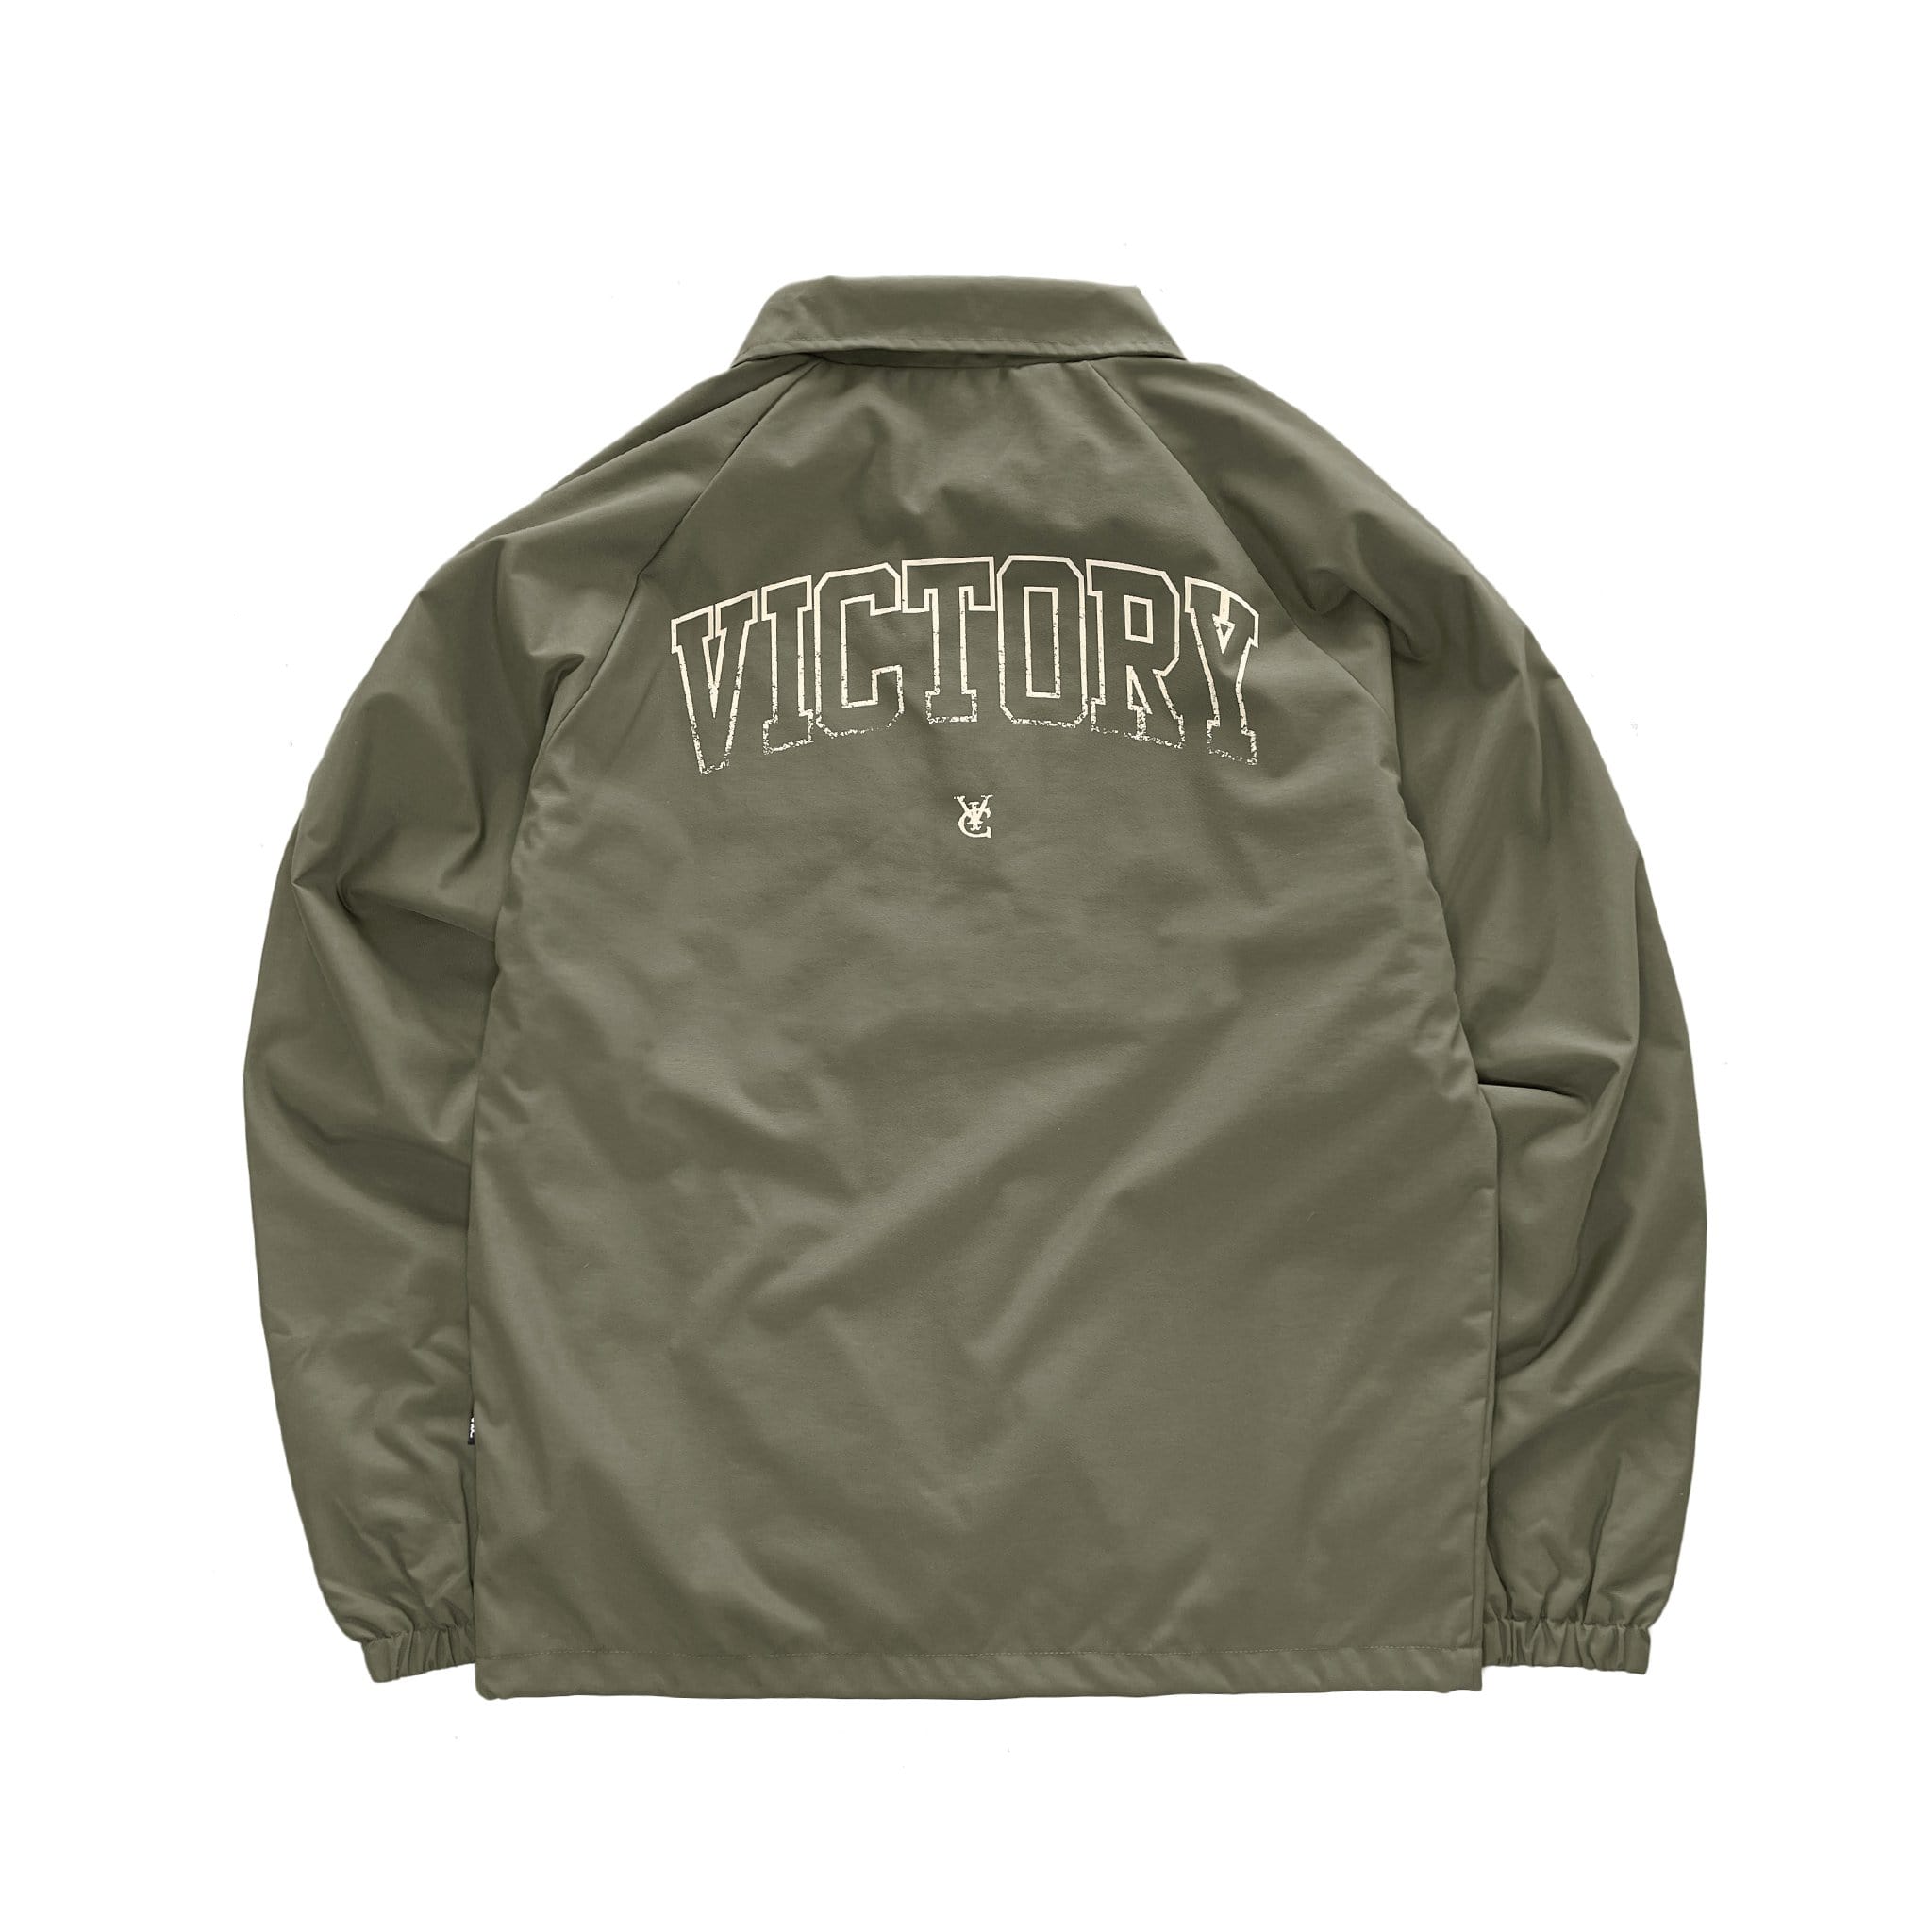 Premium quality sports showerproof coach jacket in black by New Zealand skate and streetwear clothing label VIC Apparel. Screen printed logos. 100% Oxford nylon matt finish, Regular fit, Lightweight microfibre Lining, Stash pocket inside the chest.